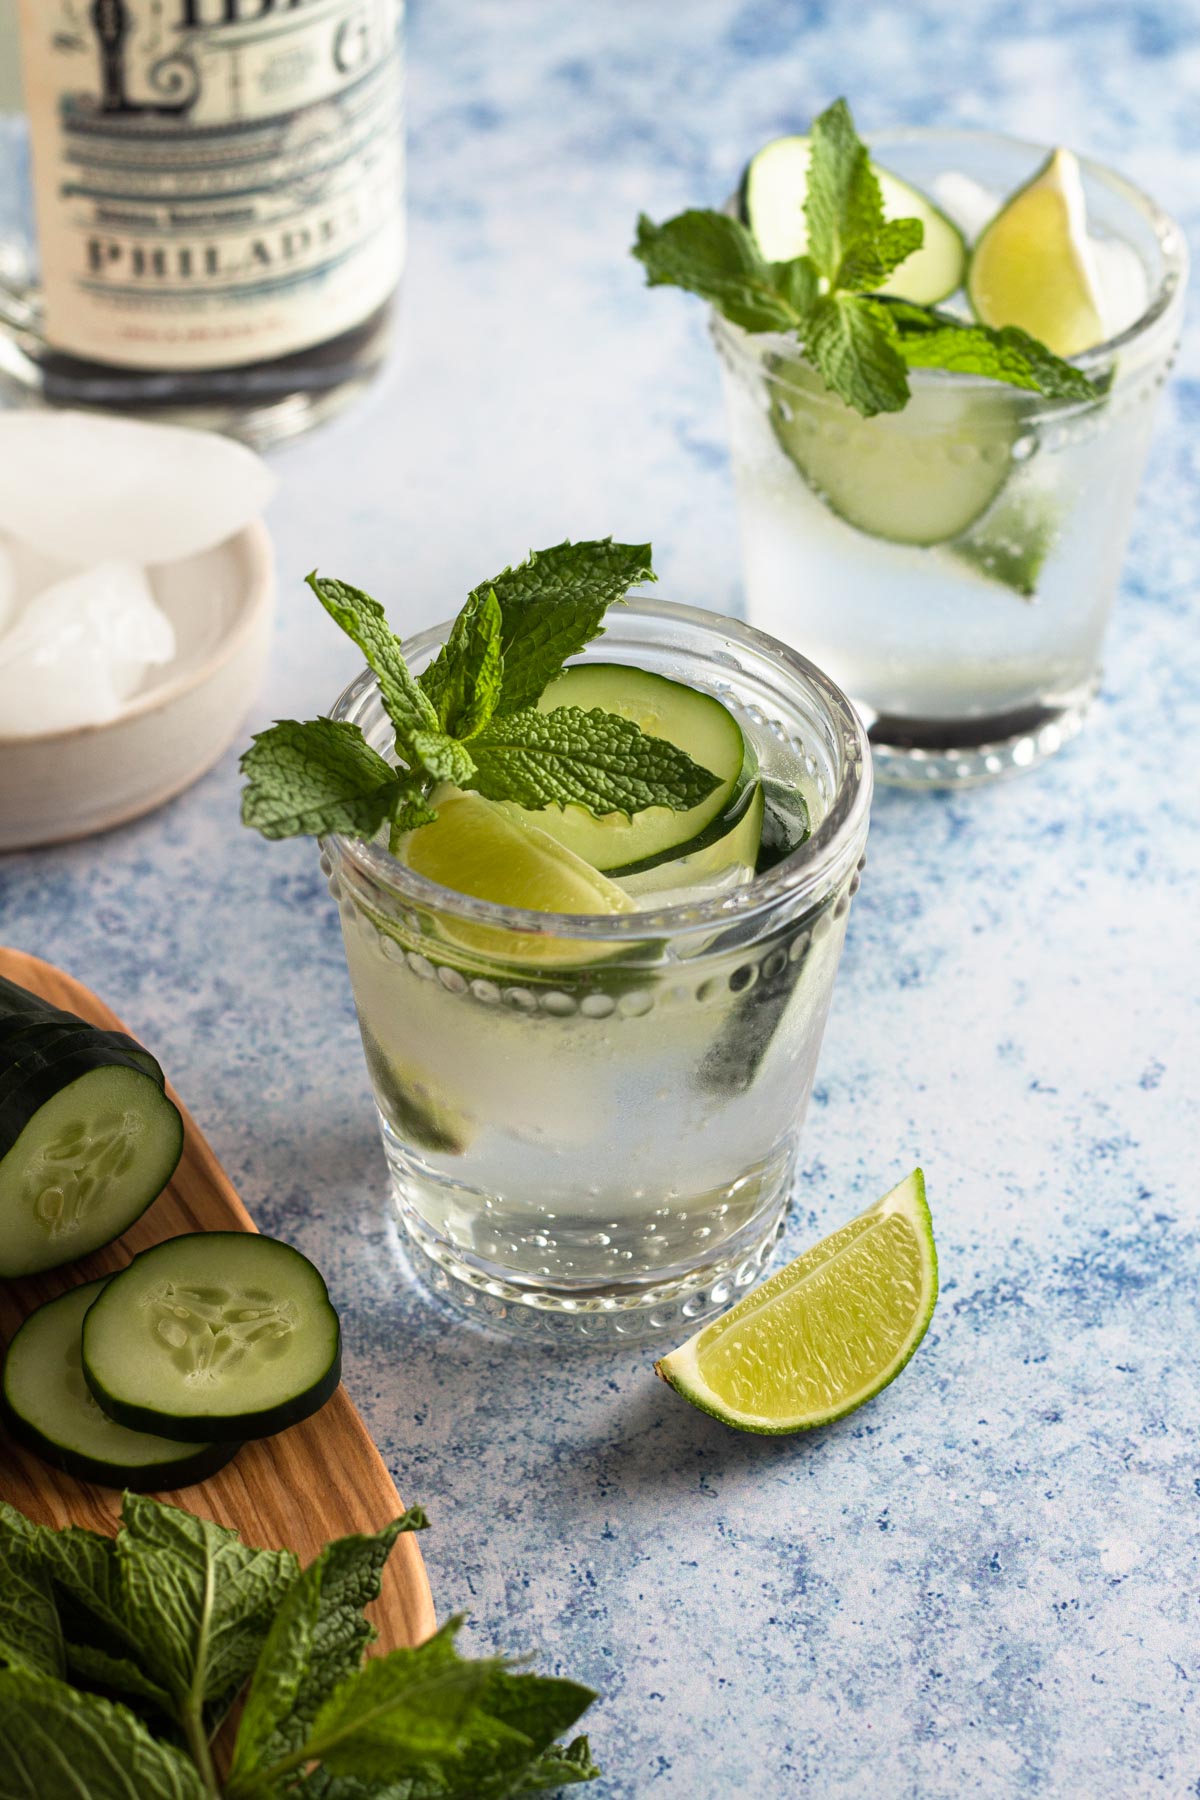 Gin and tonic garnished with a lime wedge, cucumber slices, and a sprig of mint on a speckled blue surface.